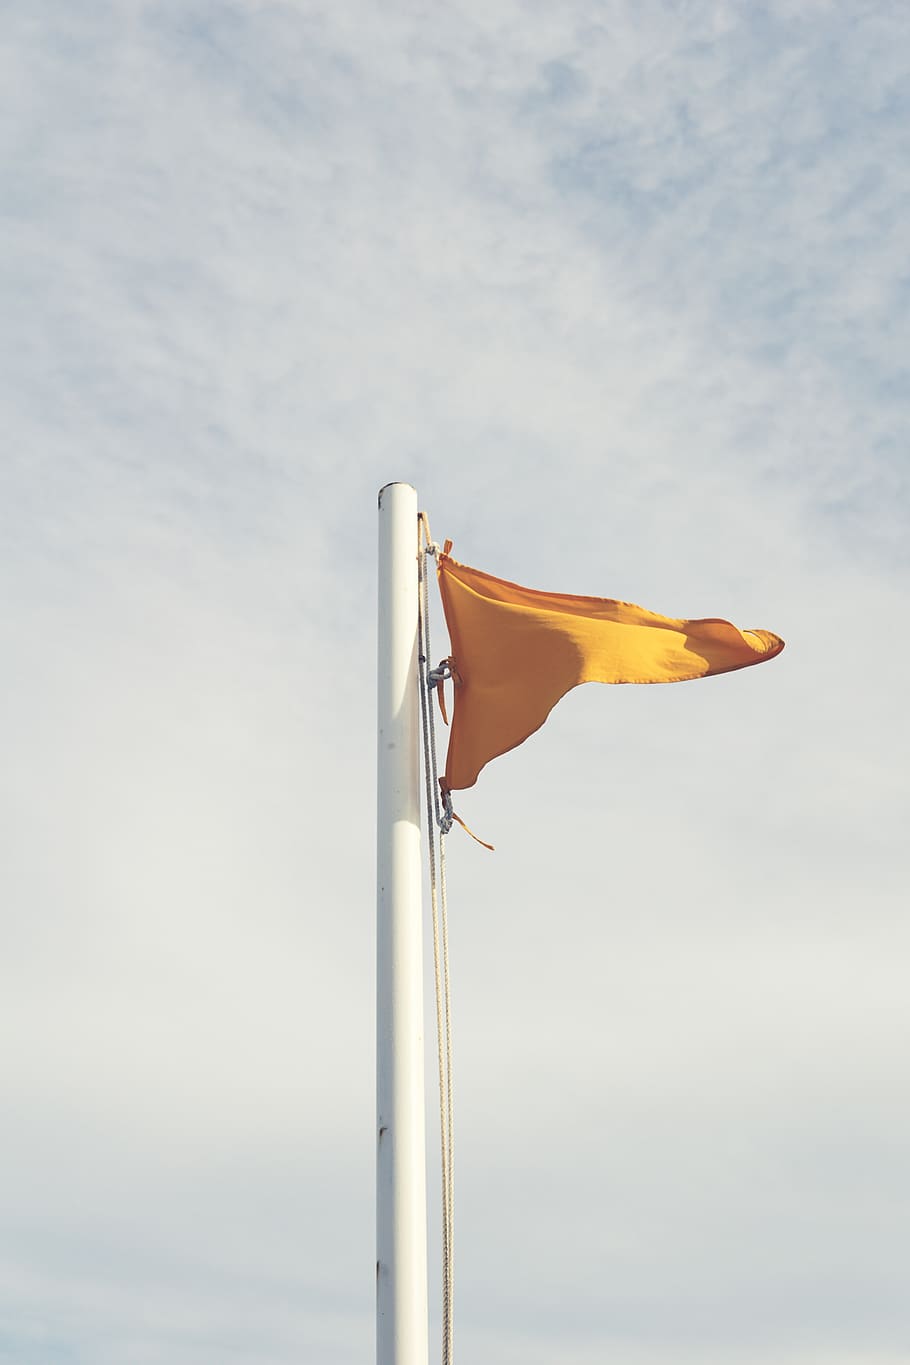 yellow flag on white pole under white clouds during daytime, emblem, HD wallpaper